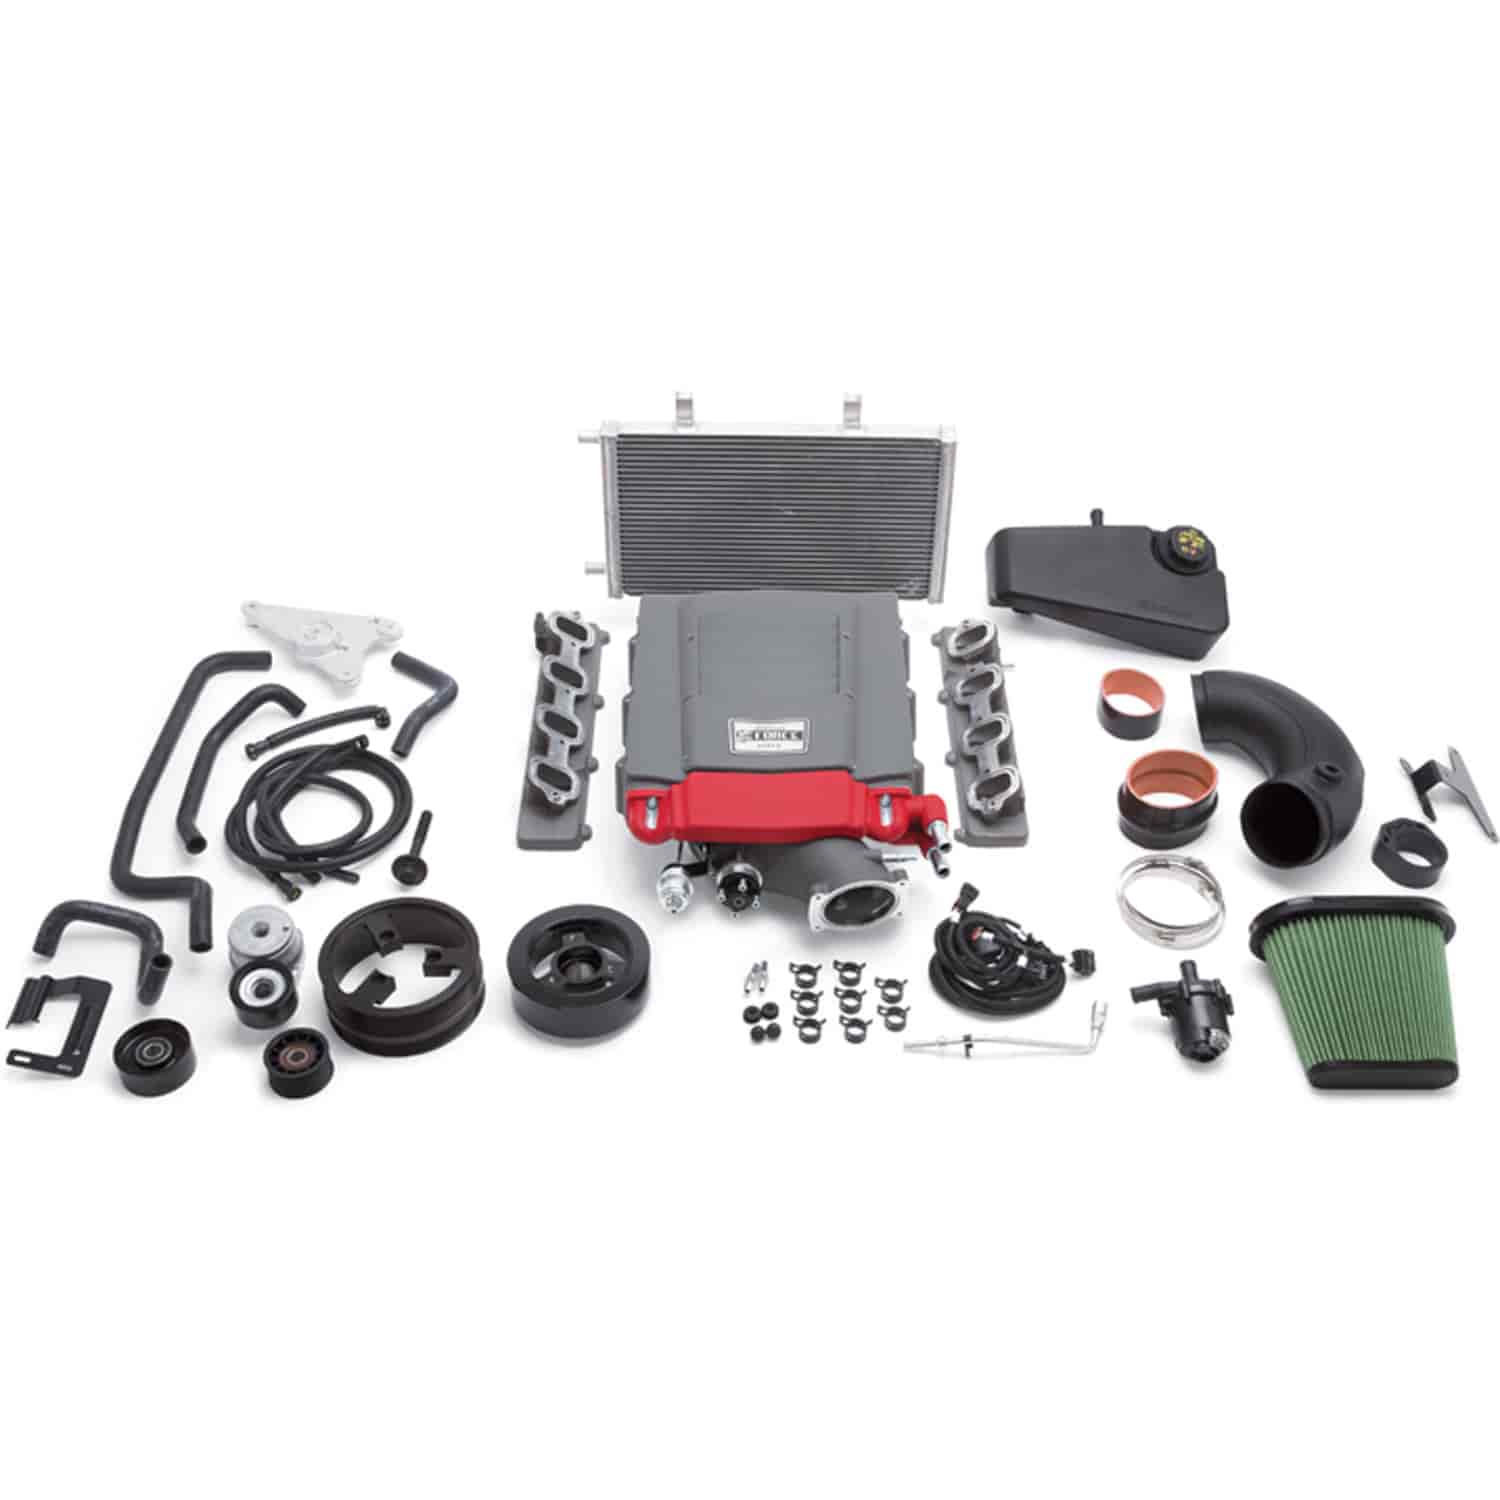 E-Force Stage 3 Supercharger Kit for 2014-2016 Corvette Stingray Z51 LT1 with Dry Sump Oil System